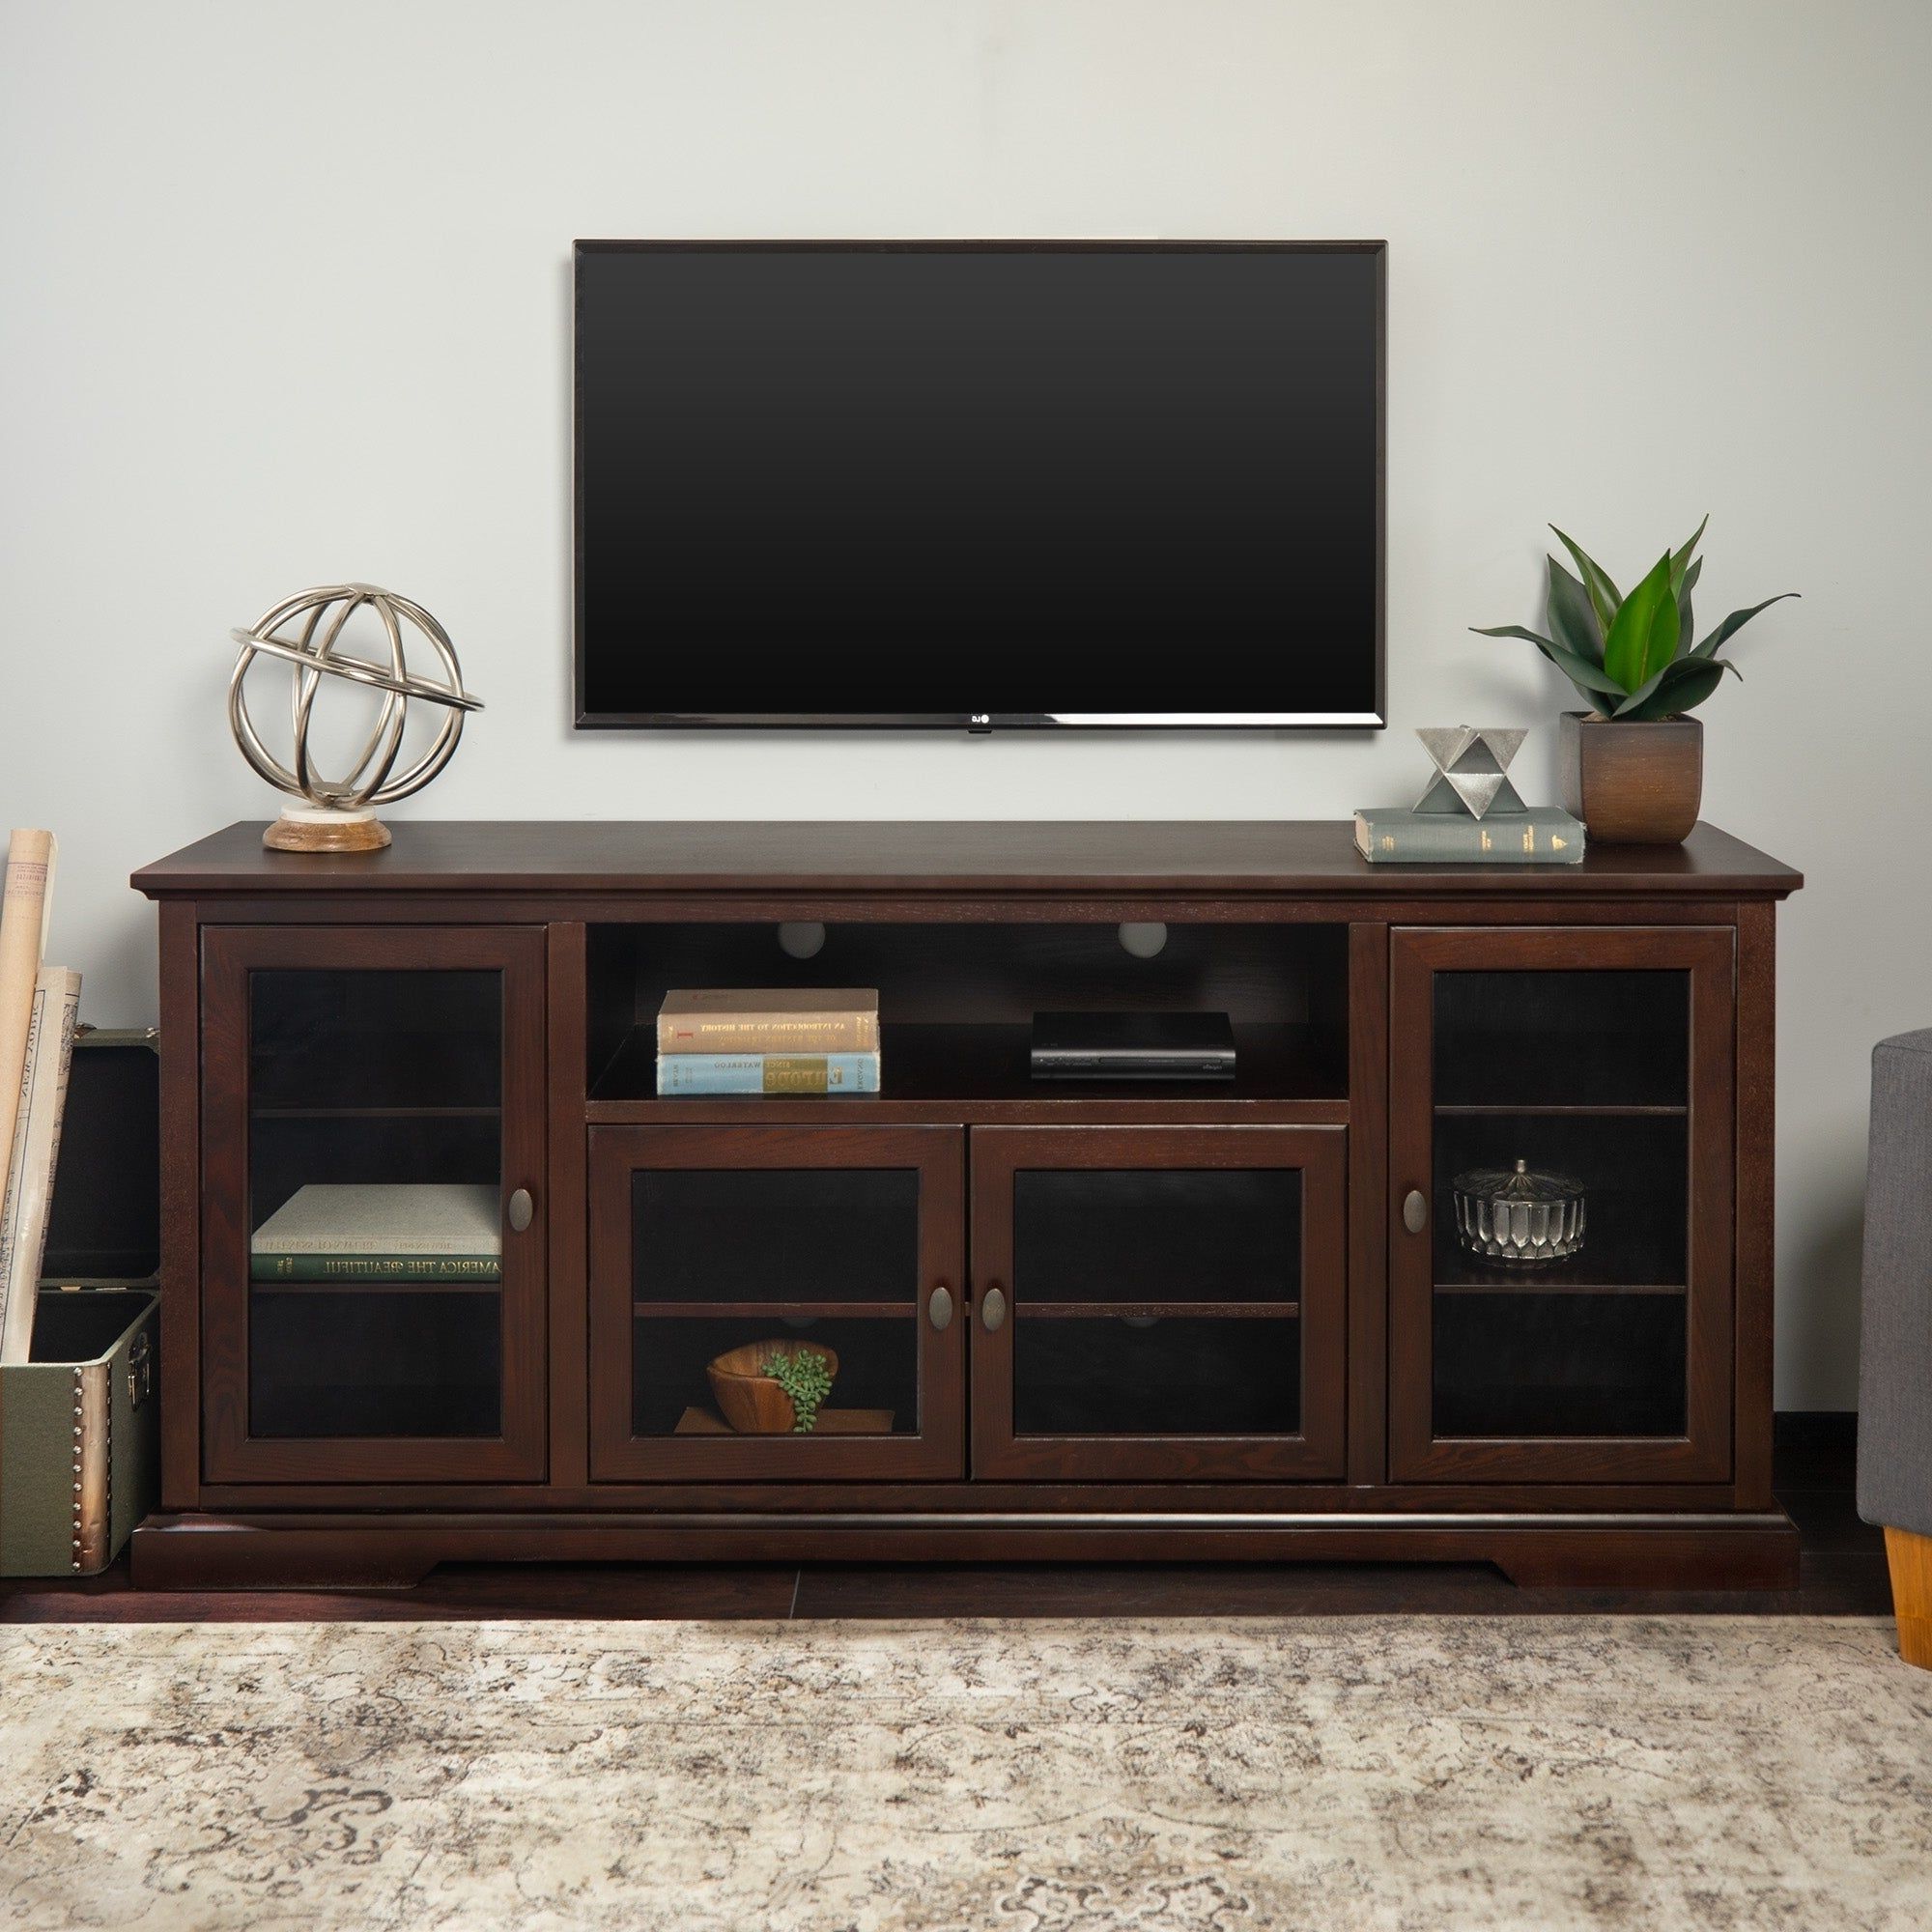 75+ T V Stand – はもながめ Regarding Mainstays 3 Door Tv Stands Console In Multiple Colors (View 18 of 20)